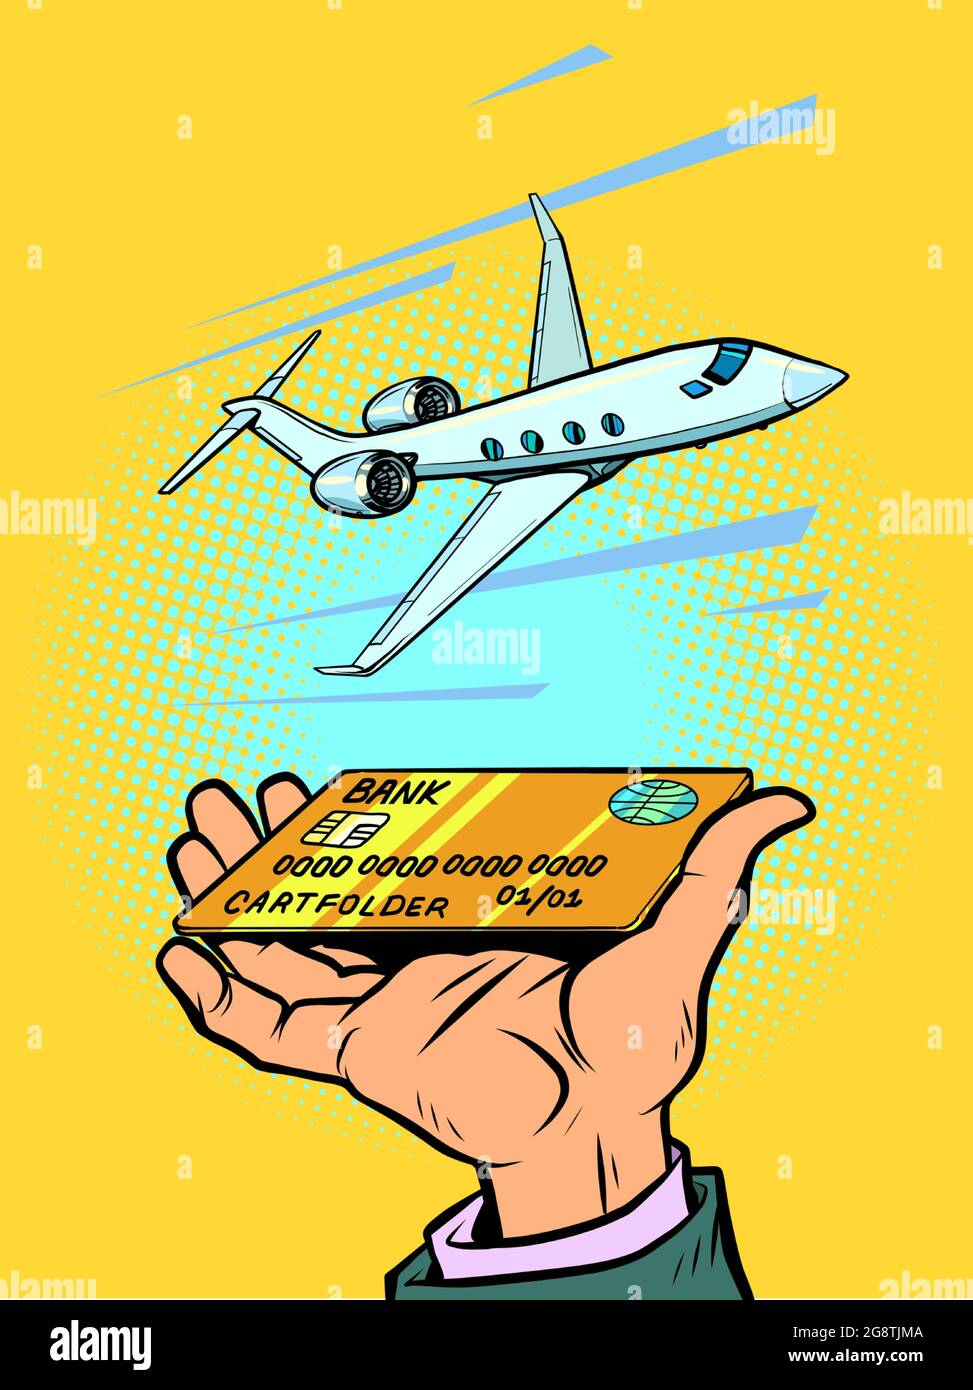 private jet passenger plane. speed and business prestige Stock Vector